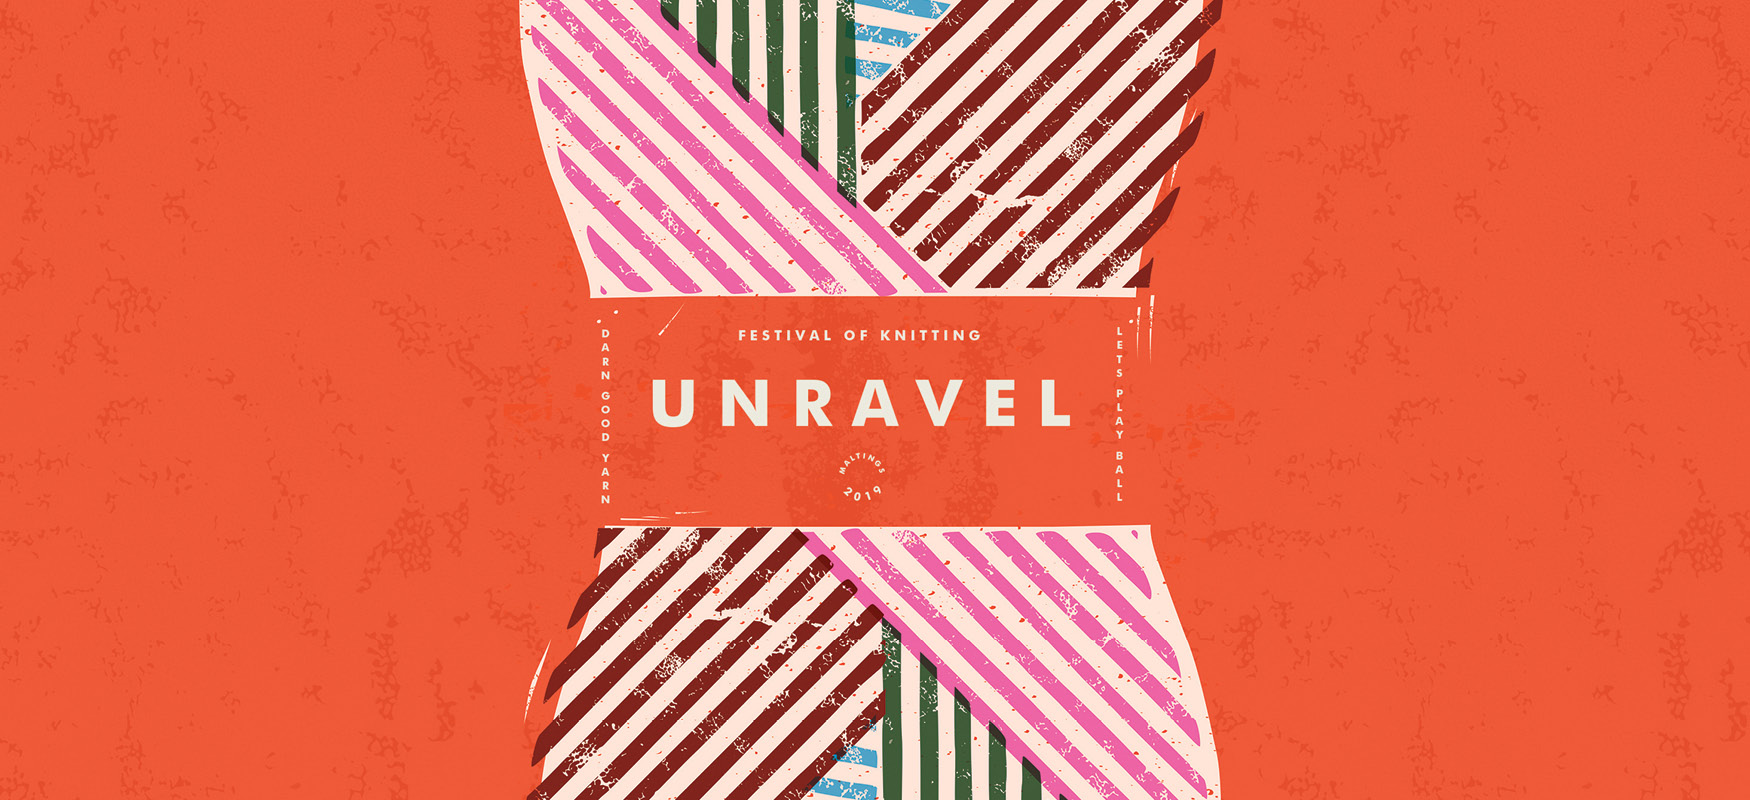 unravel festival, farnham, surrey, whats on, where, to go arts and crafts, knitting, 